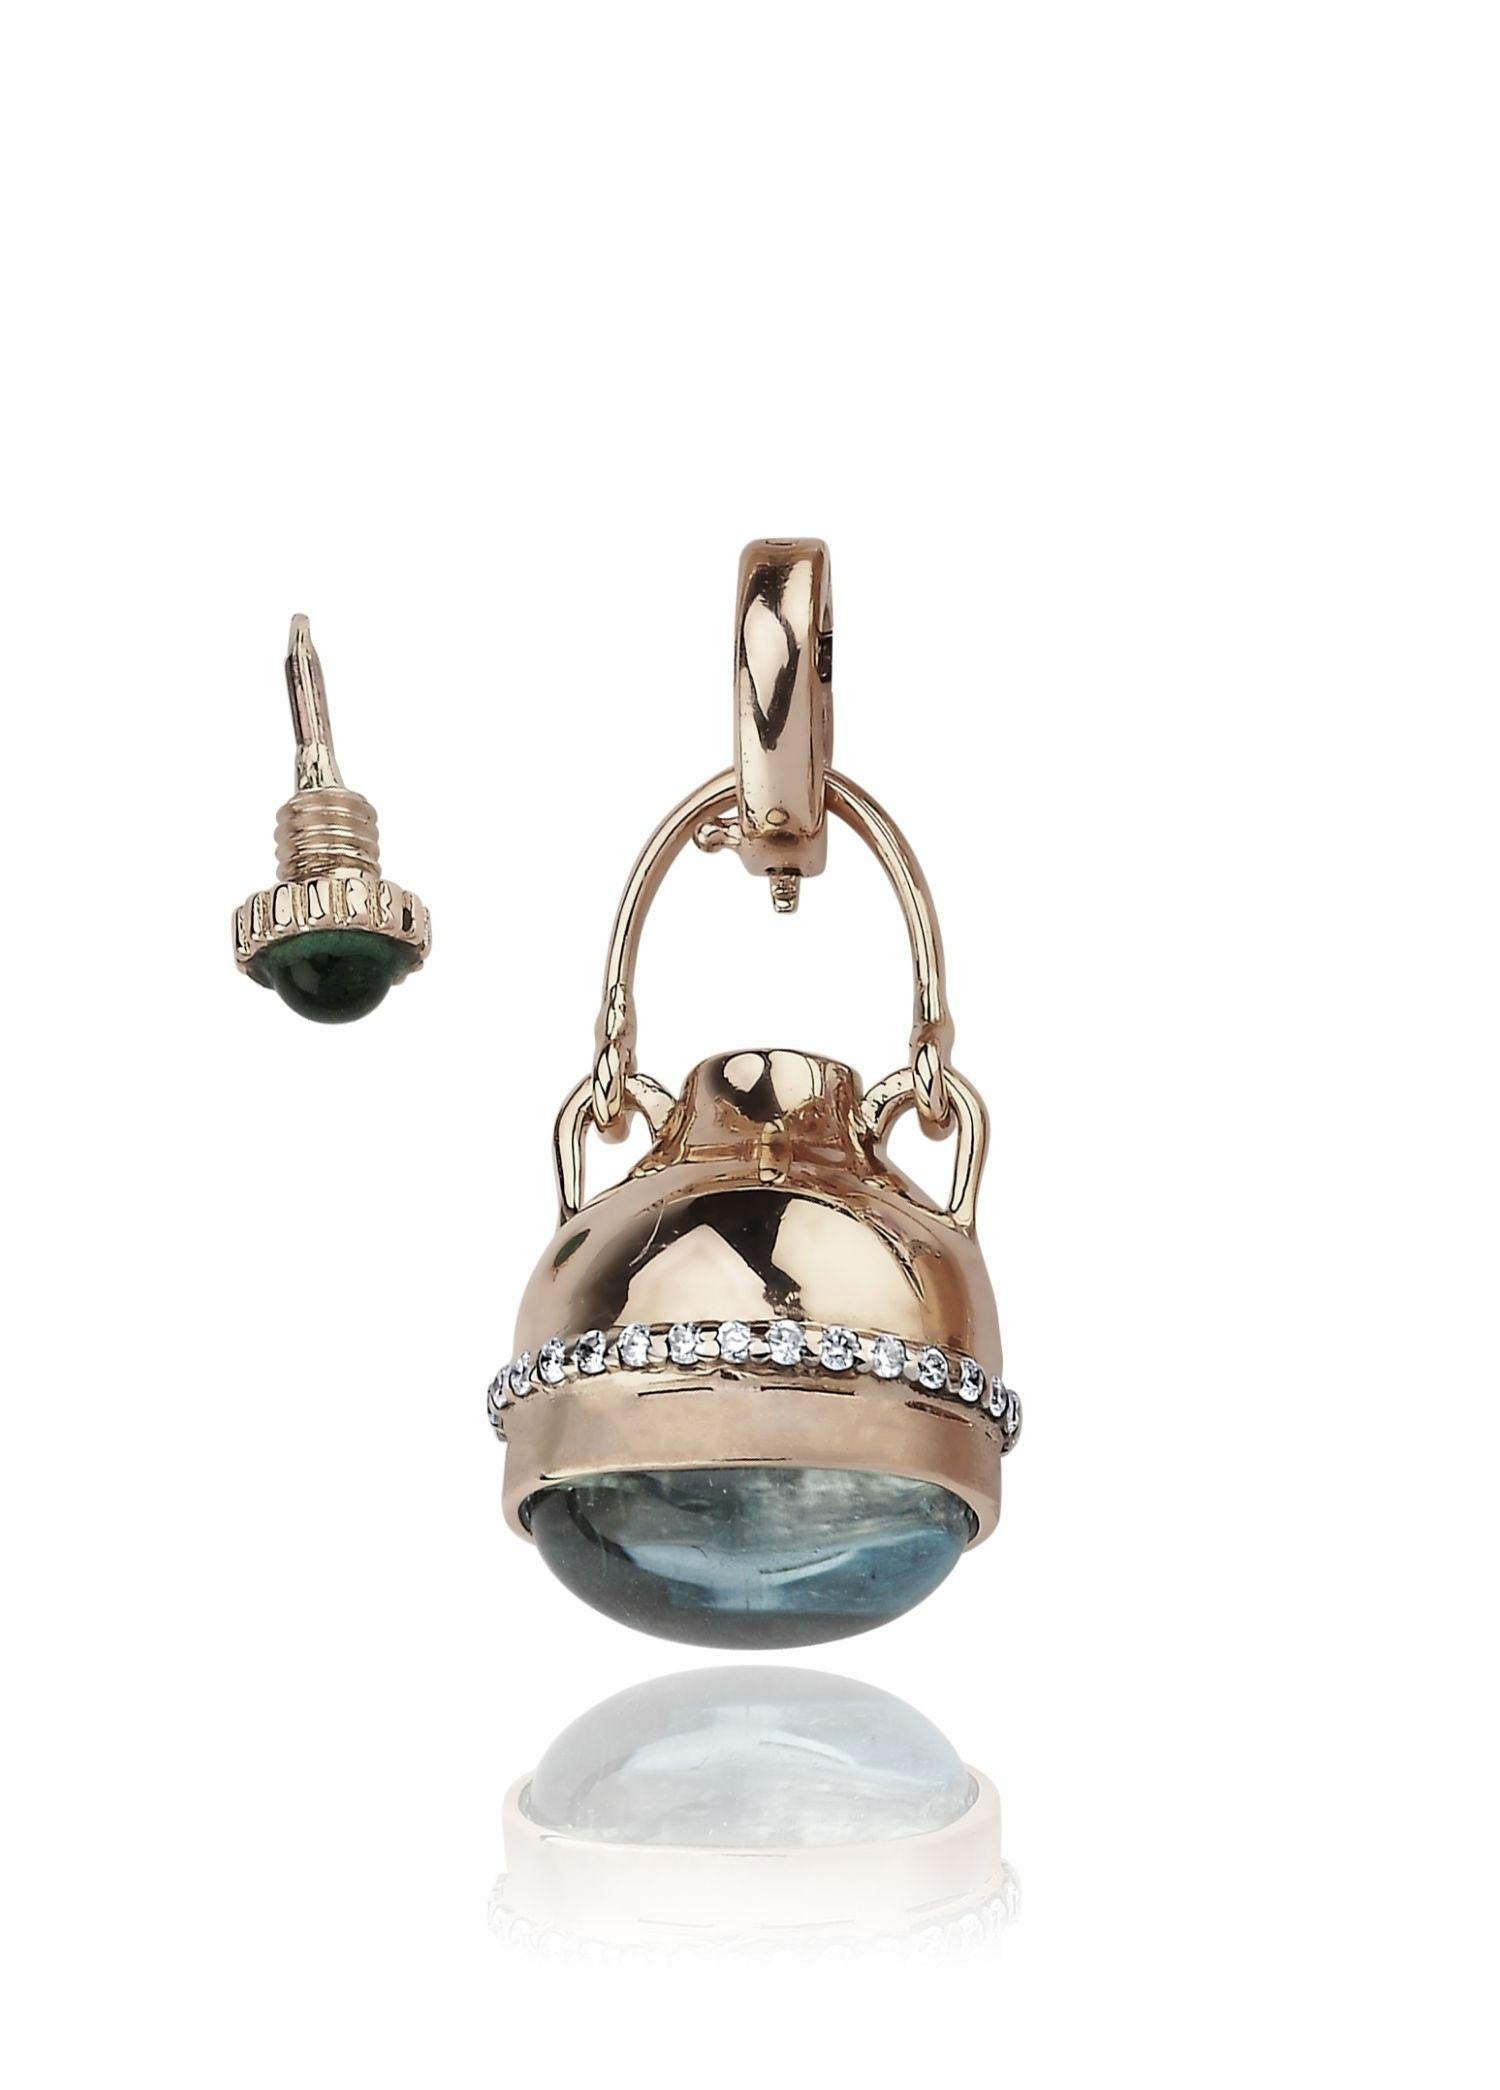 Melie Jewelry Perfume Bottle Pendant Charm

14K Rose Gold, 0.11 ct Diamond/G-VS, 0.24 ct Tourmaline, 3.52 ct Blue Topaz

The Story Behind
In the 16th century, 